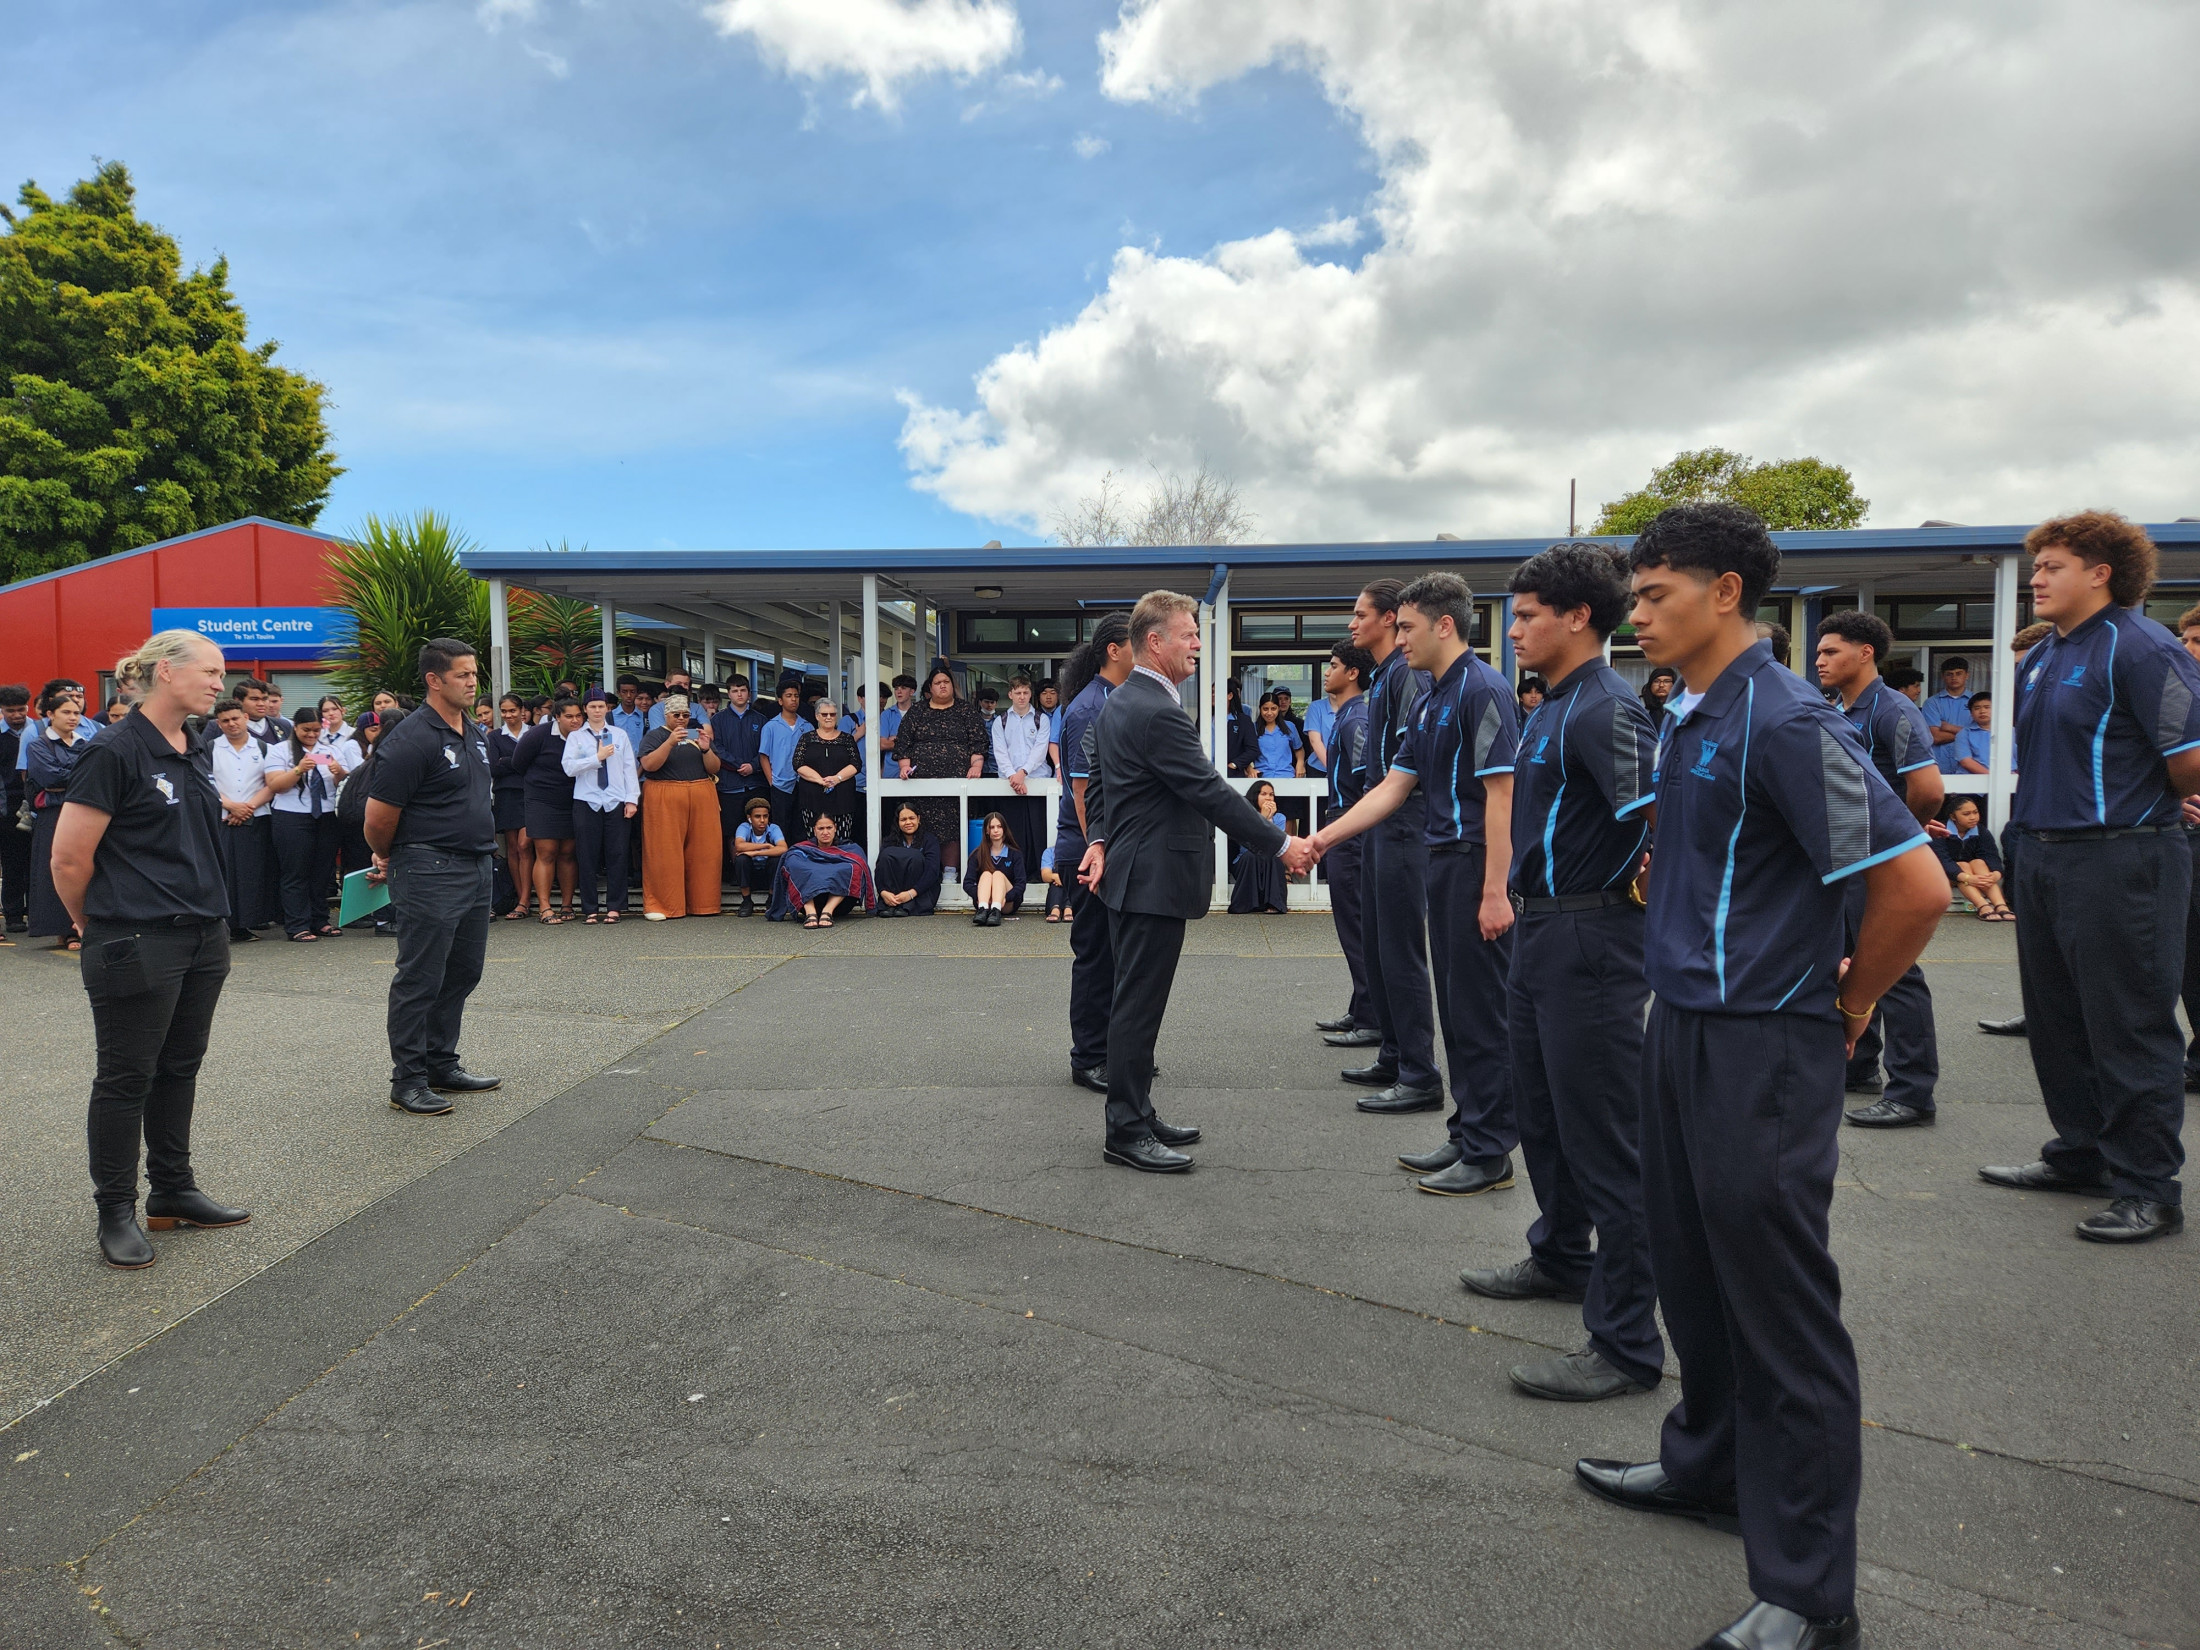 Final March Out for Year 13 Services Academy